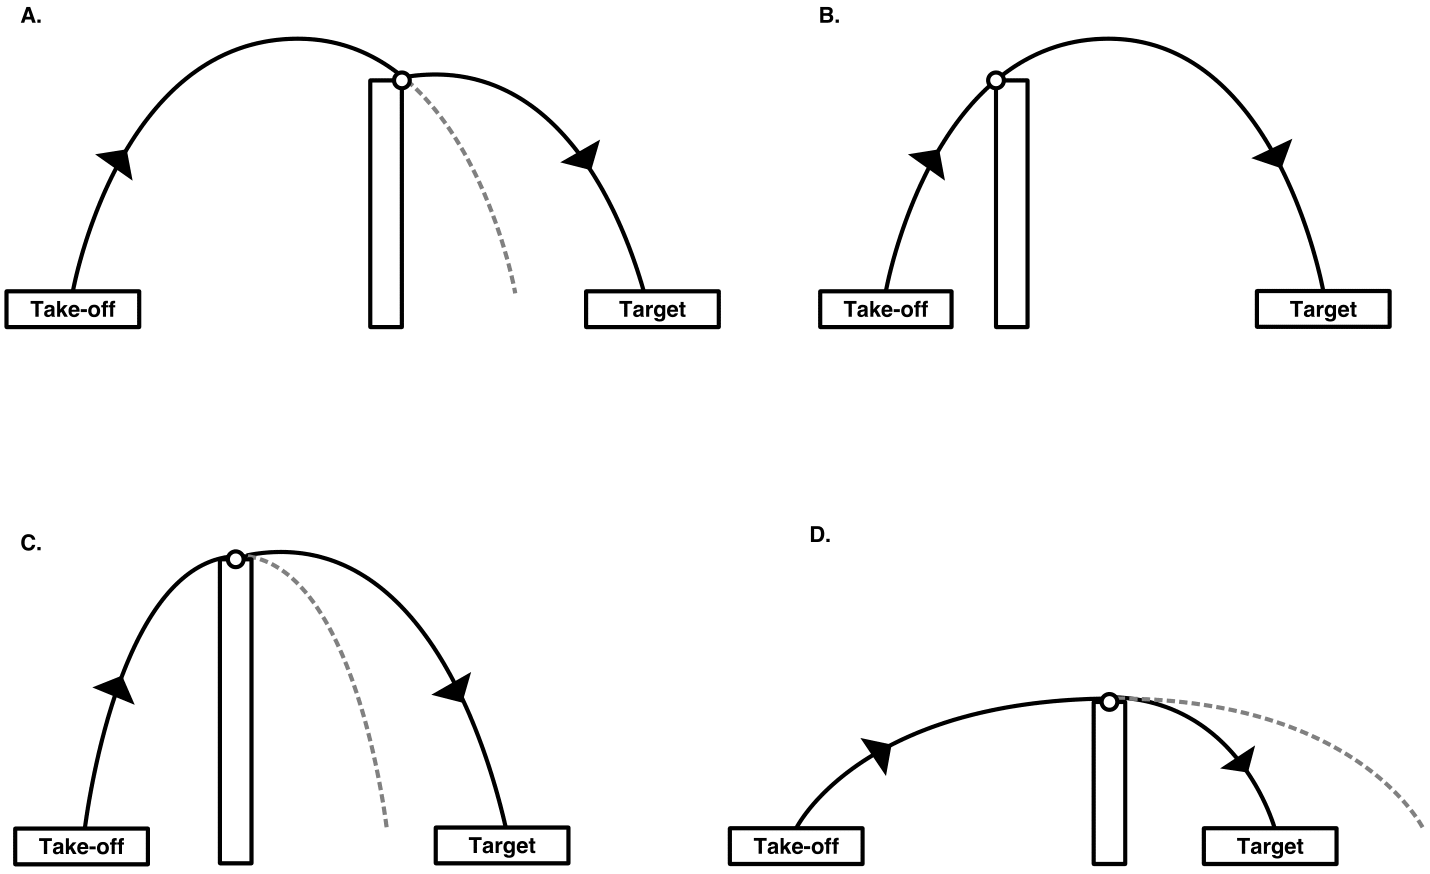 Diagrams illustrating different possible kong vault projectile arcs. A - obstacle contact occurs late in the dive arc to reach a far target and requires adjustment to extend flight. B - obstacle contact occurs early in the same dive arc as A, but take-off adjustments have aligned the dive arc with the target and little adjustment is required. C - obstacle contact in a high, narrow dive arc from a close take-off that requires adjustment to reach target. D - a low and elongated dive arc from a far take-off on a low obstacle that requires adjustment to reach a close target.